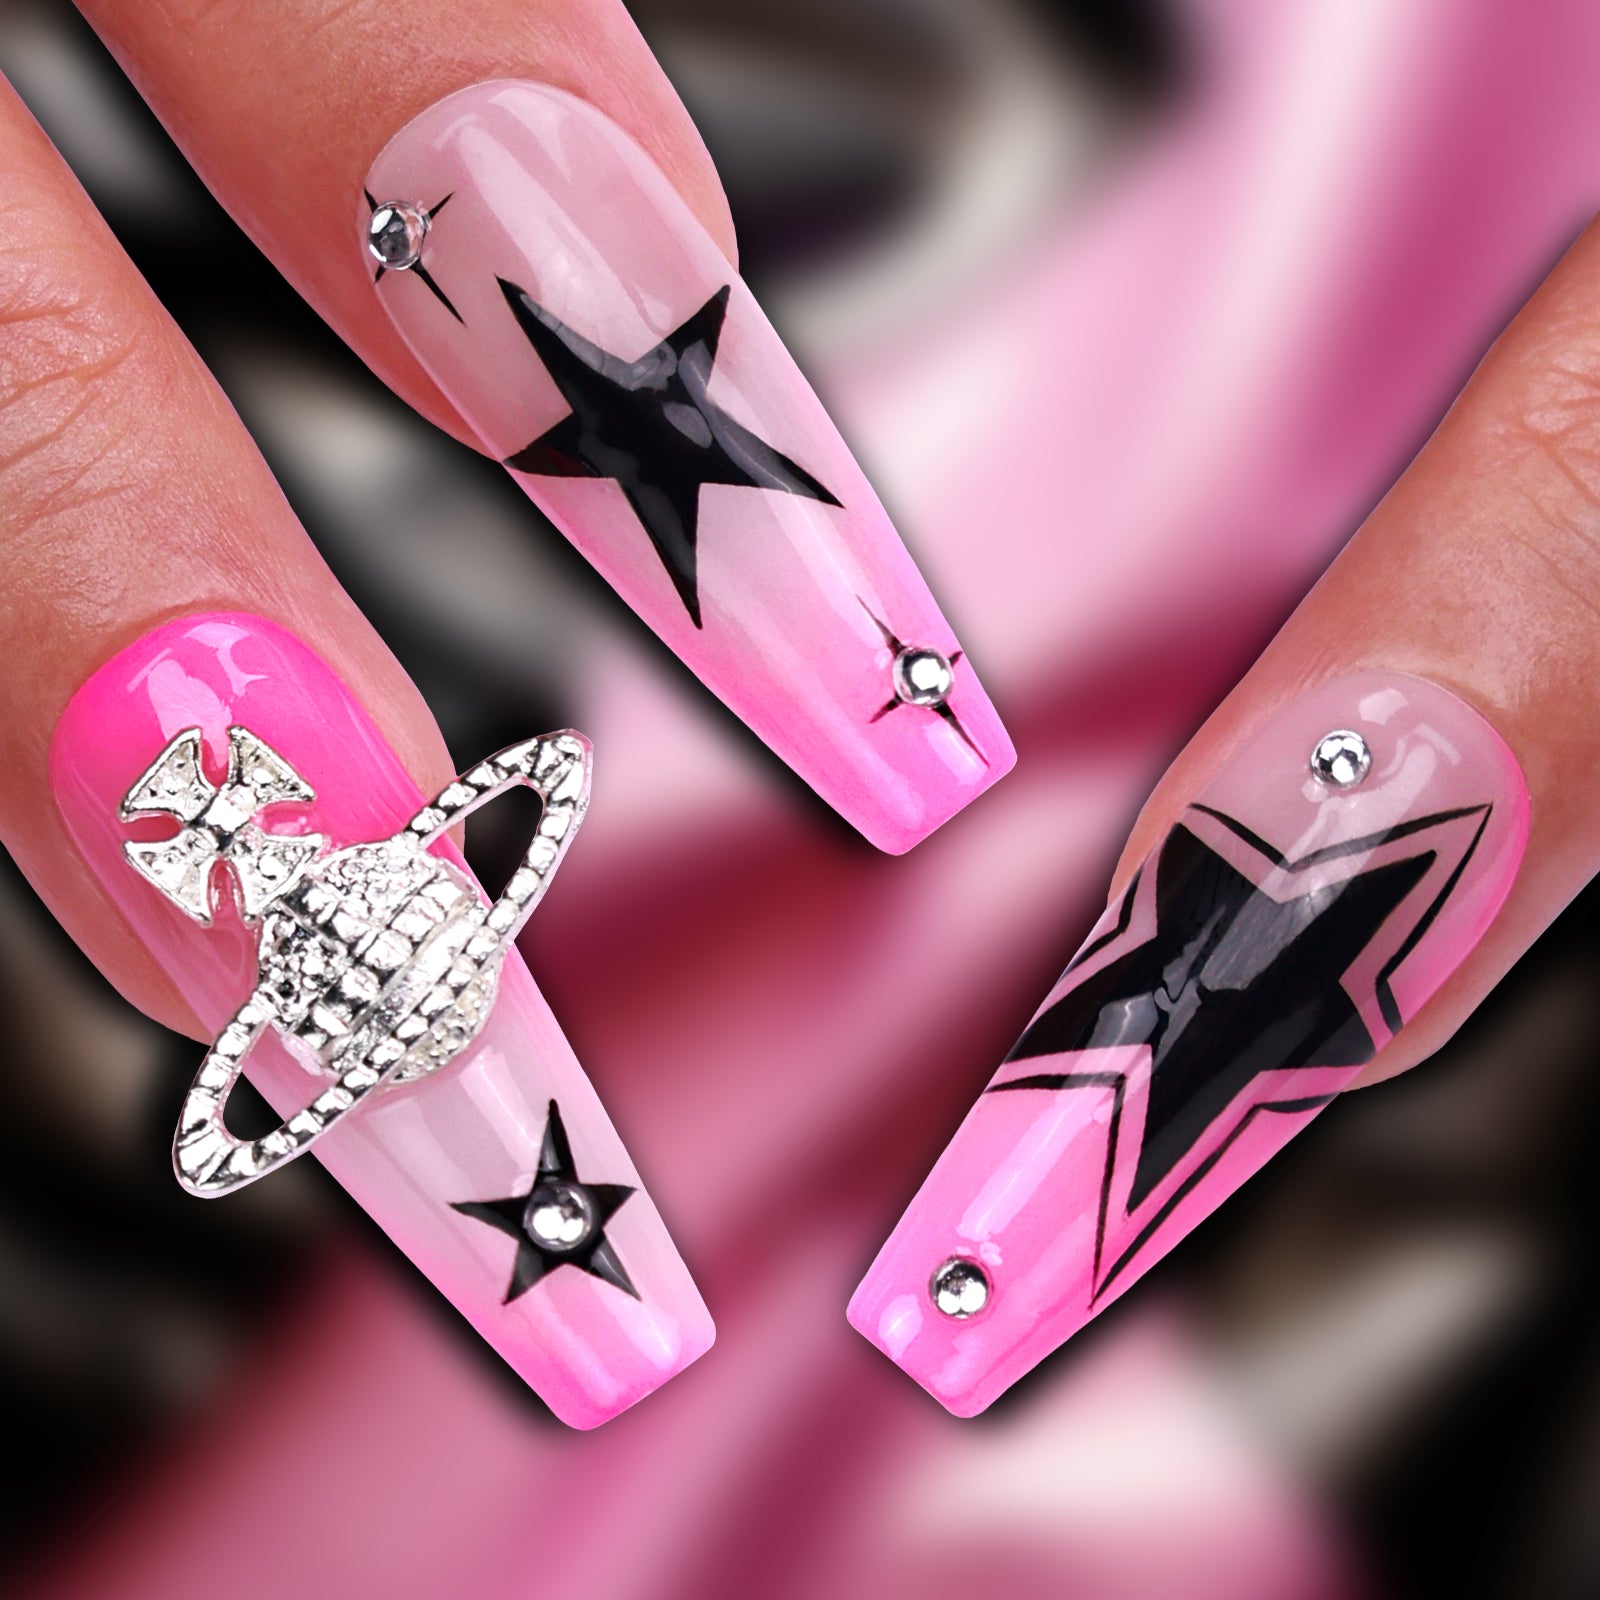 Louis Vuitton-style custom press on nails. Can be